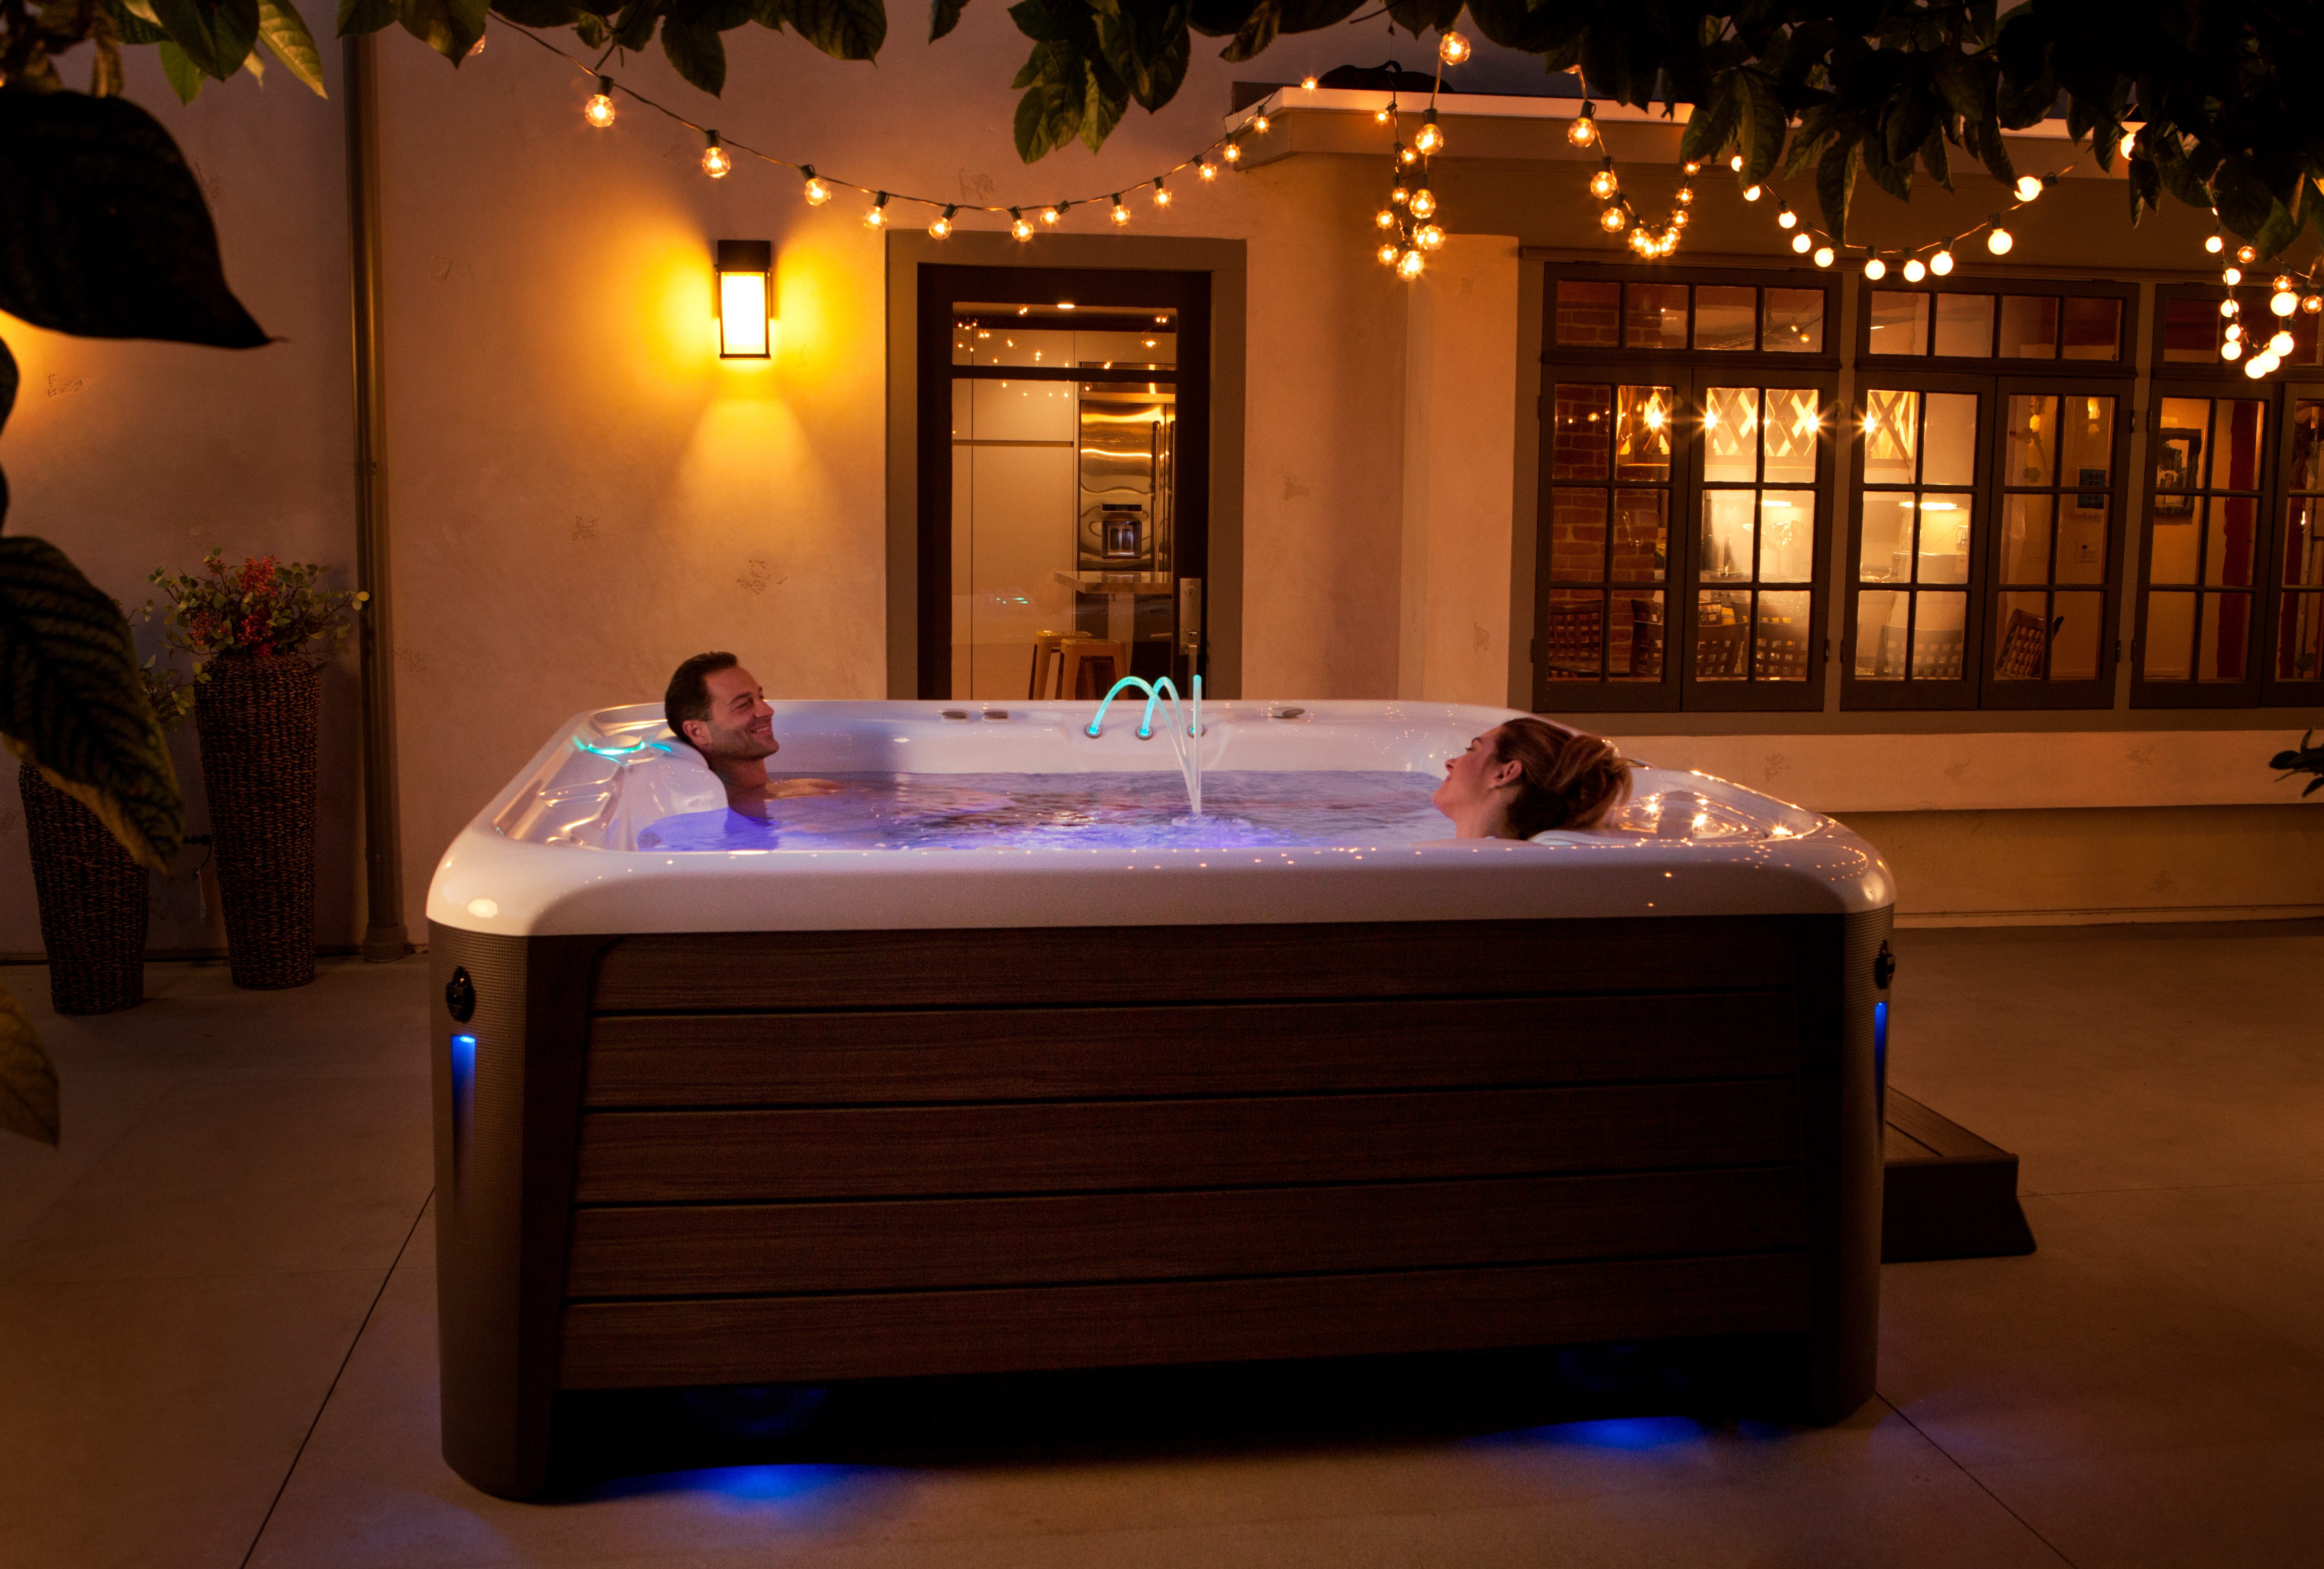 Did you know your hot tub can help with weight loss?